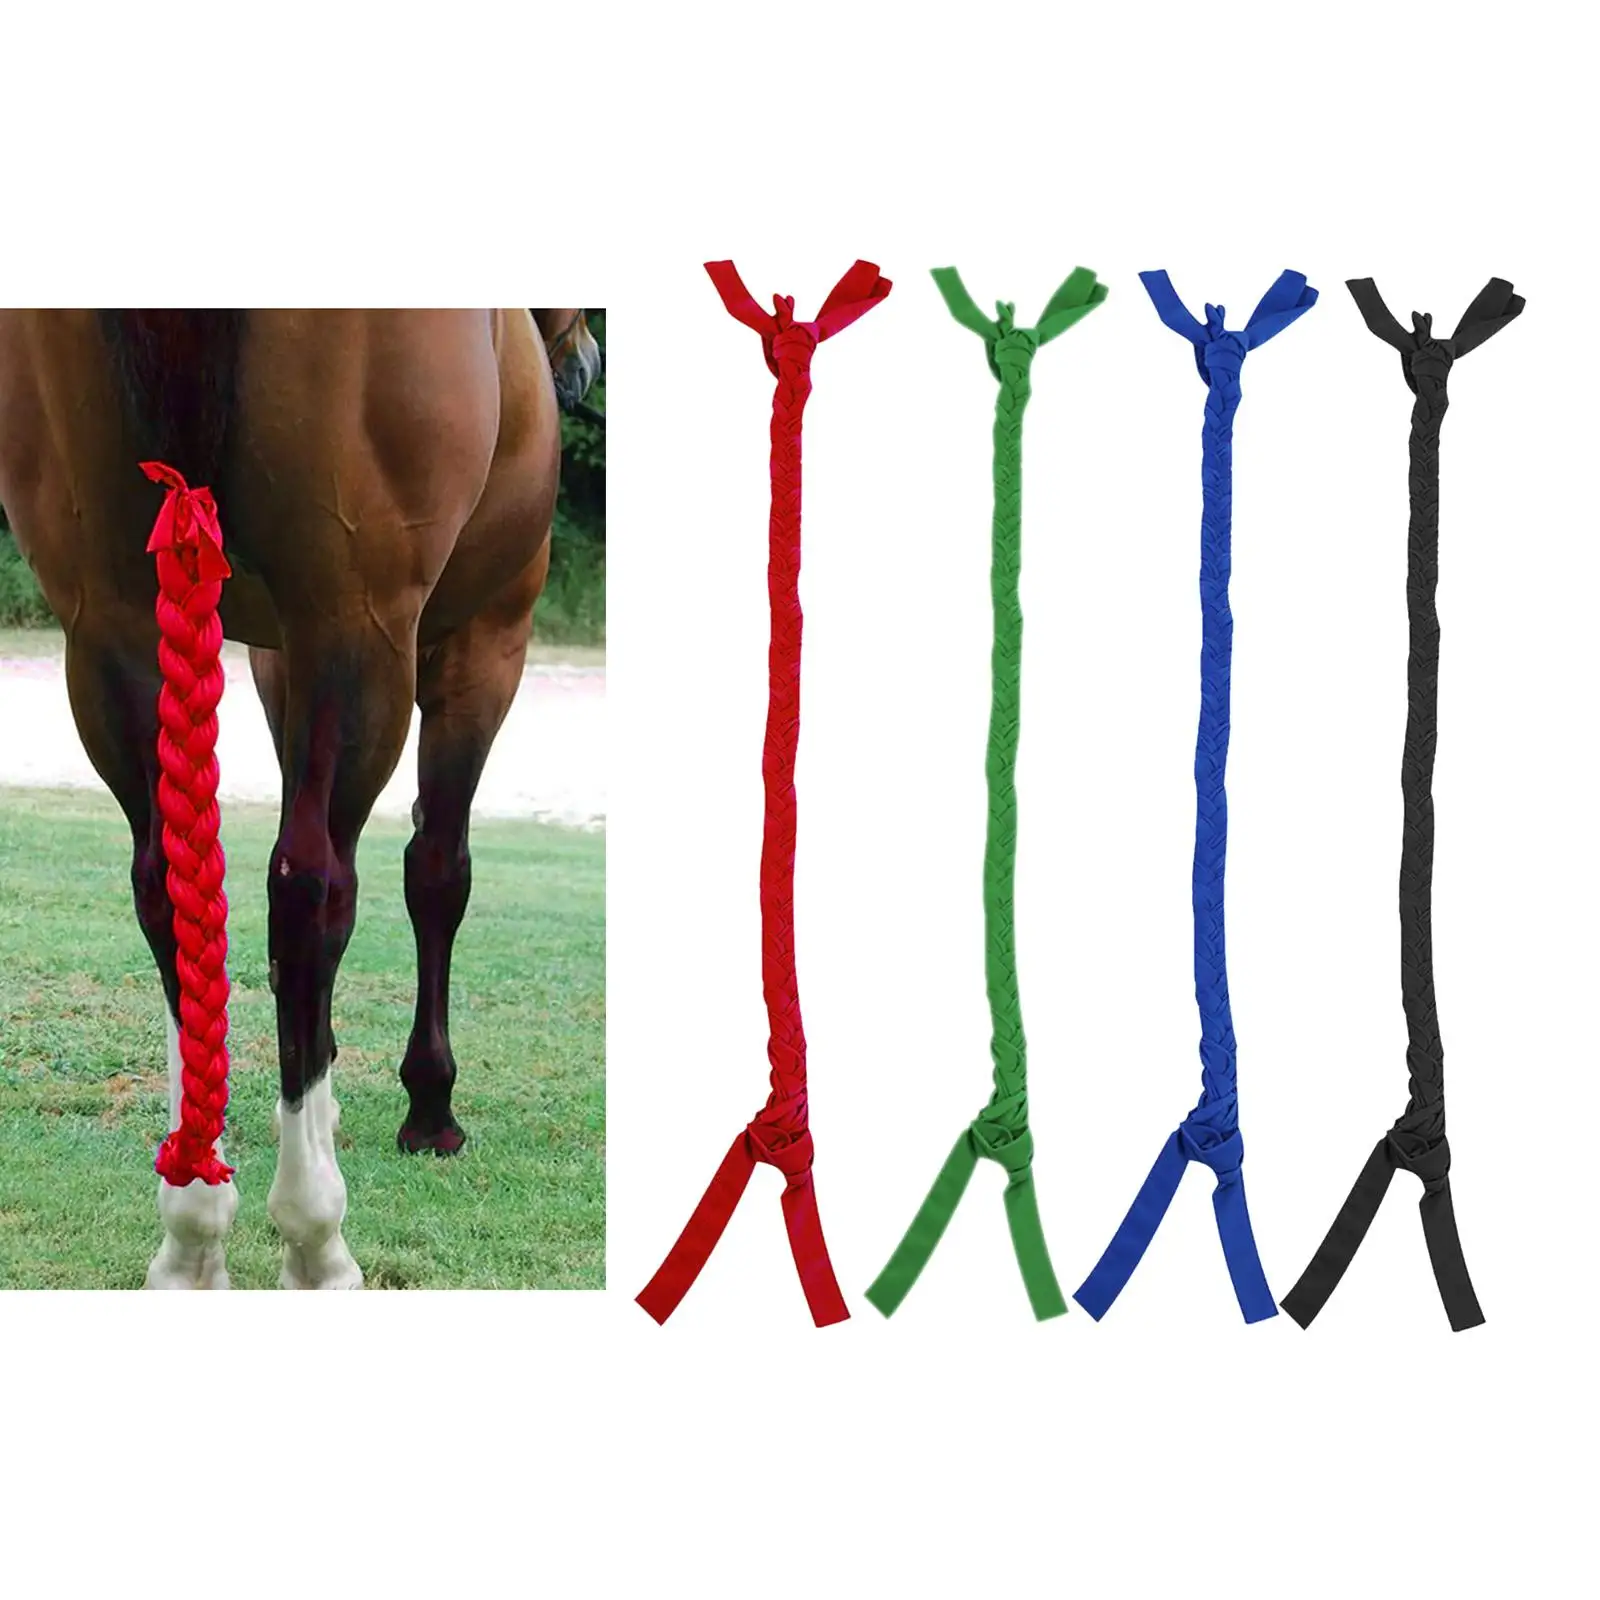 Horse Tail Bag Tail Guard Horse Tail Protection Ponytail Fashion Decoration Equestrian Accessories